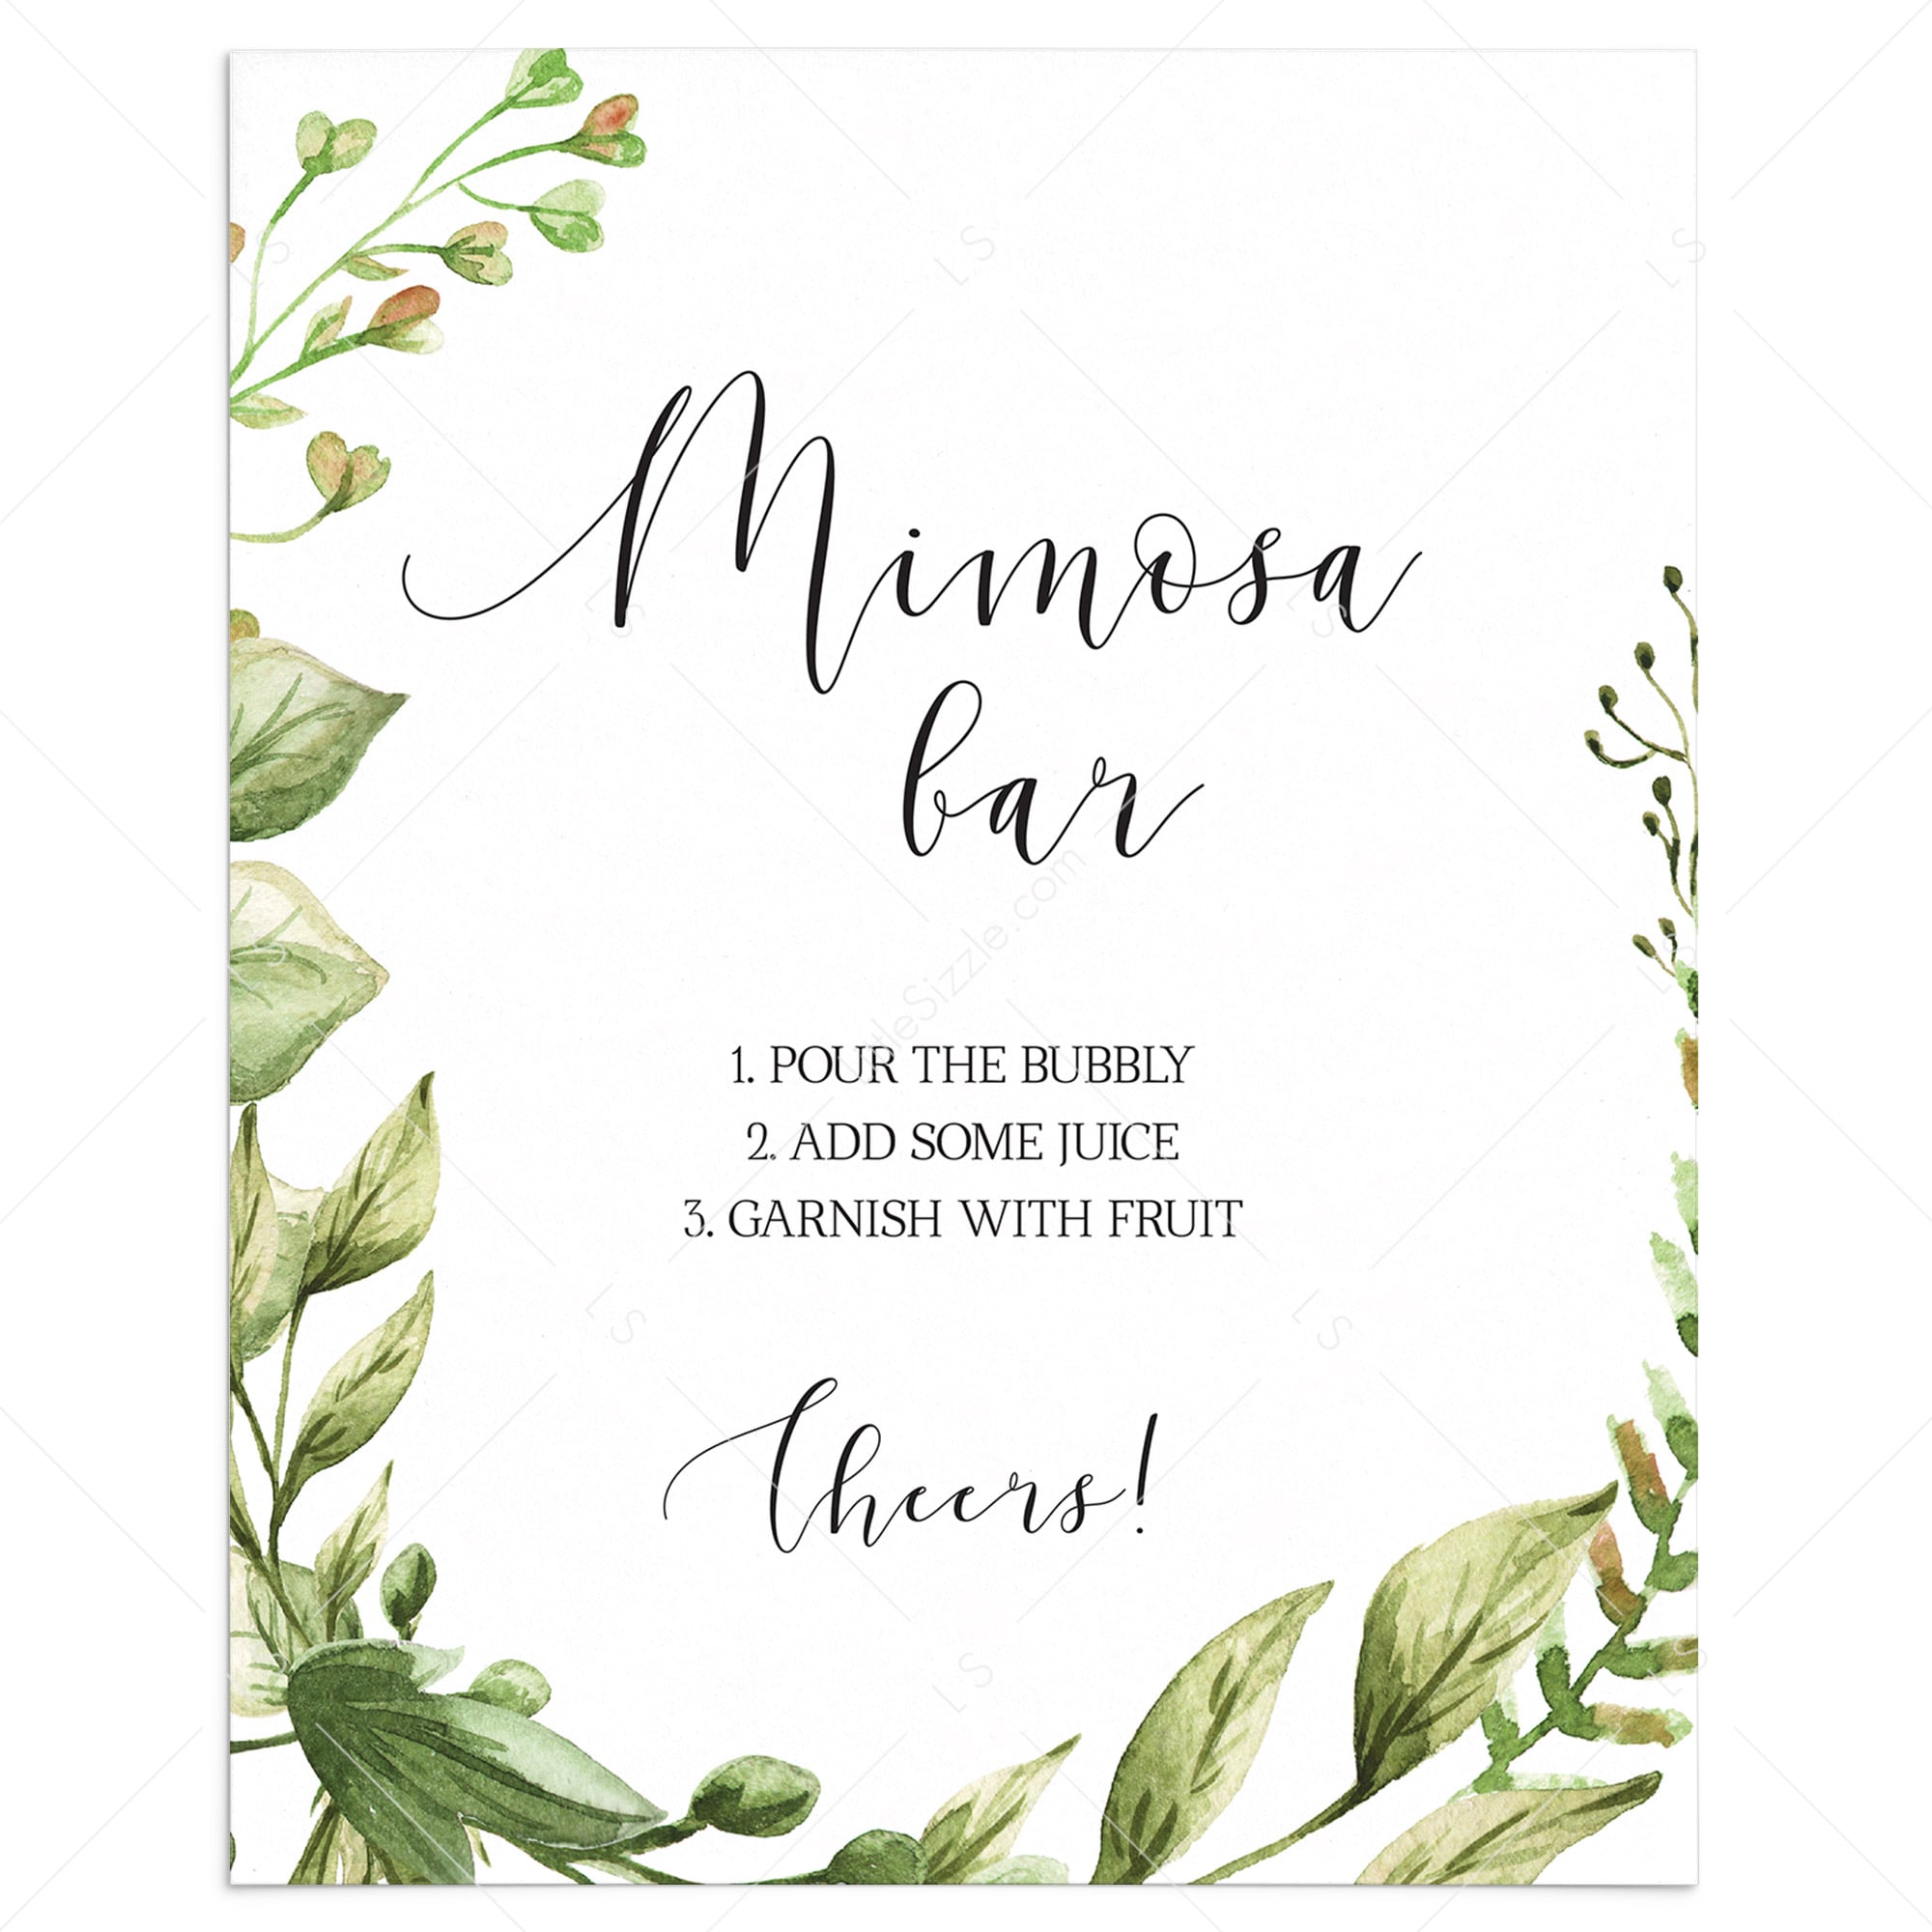 Printable Mimosa sign for baby shower watercolor leaves by LittleSizzle